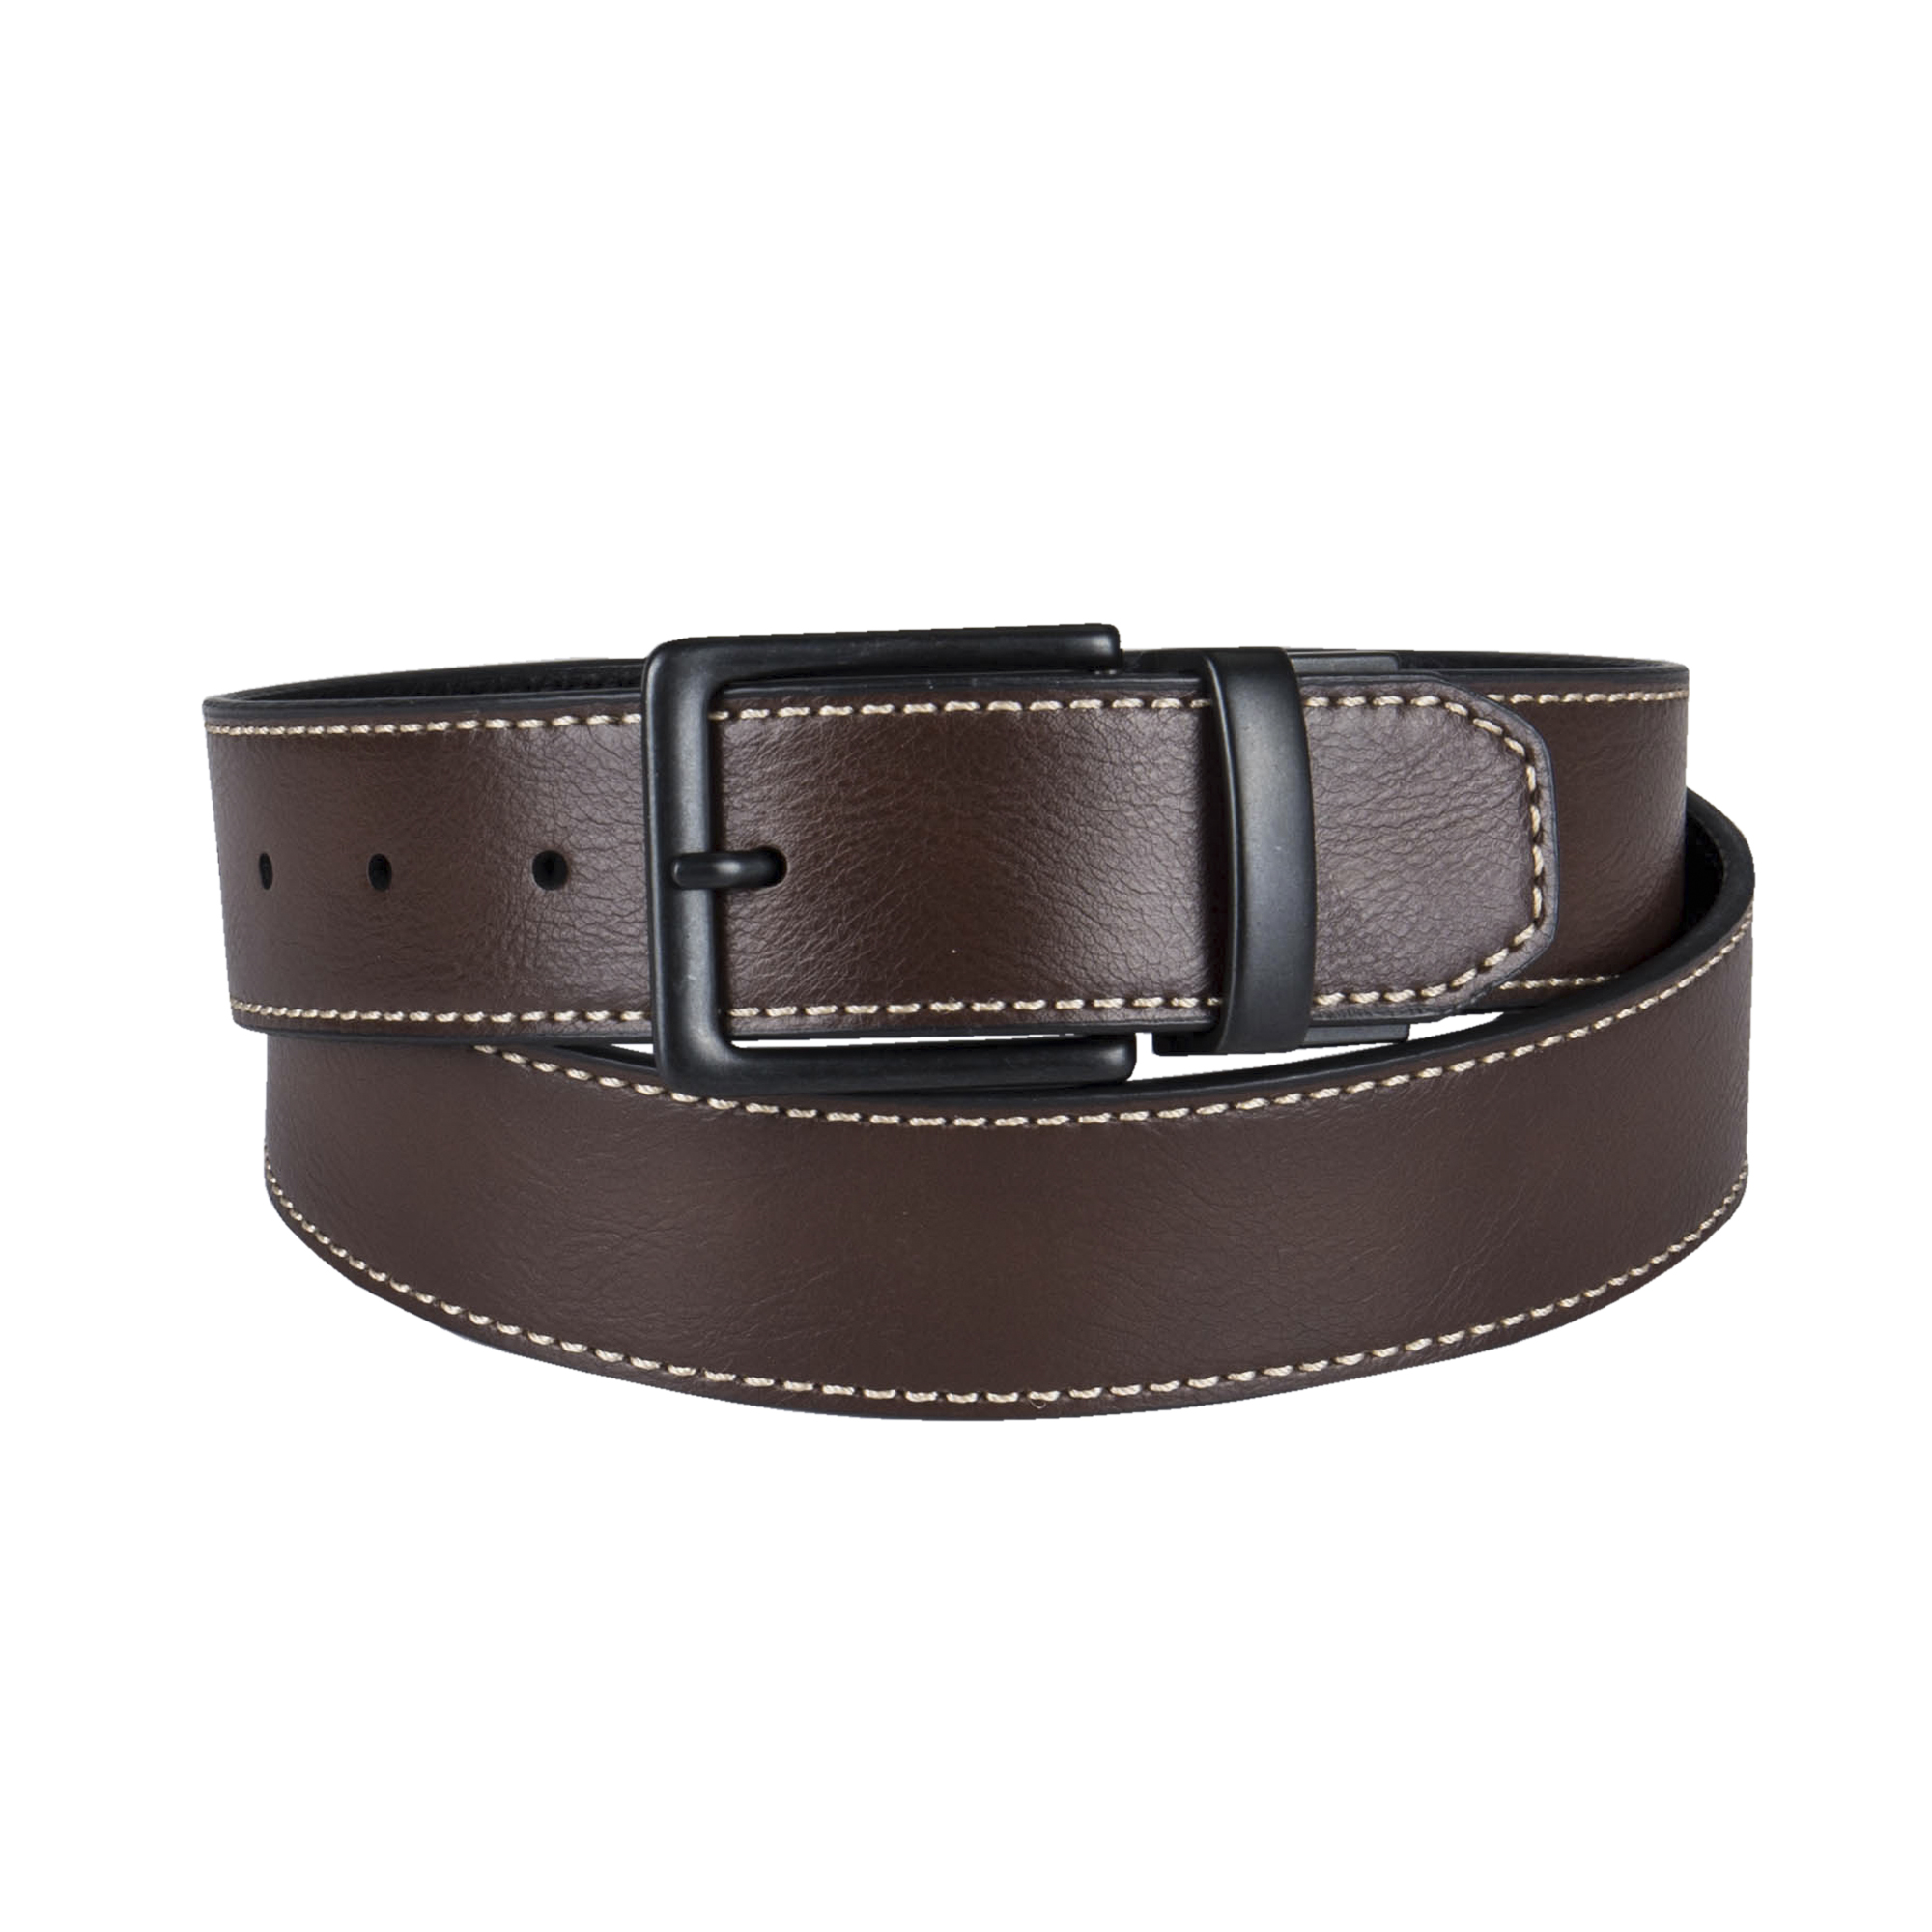 Levi's Men's Two-in-One Reversible Casual Jean Belt - image 1 of 7